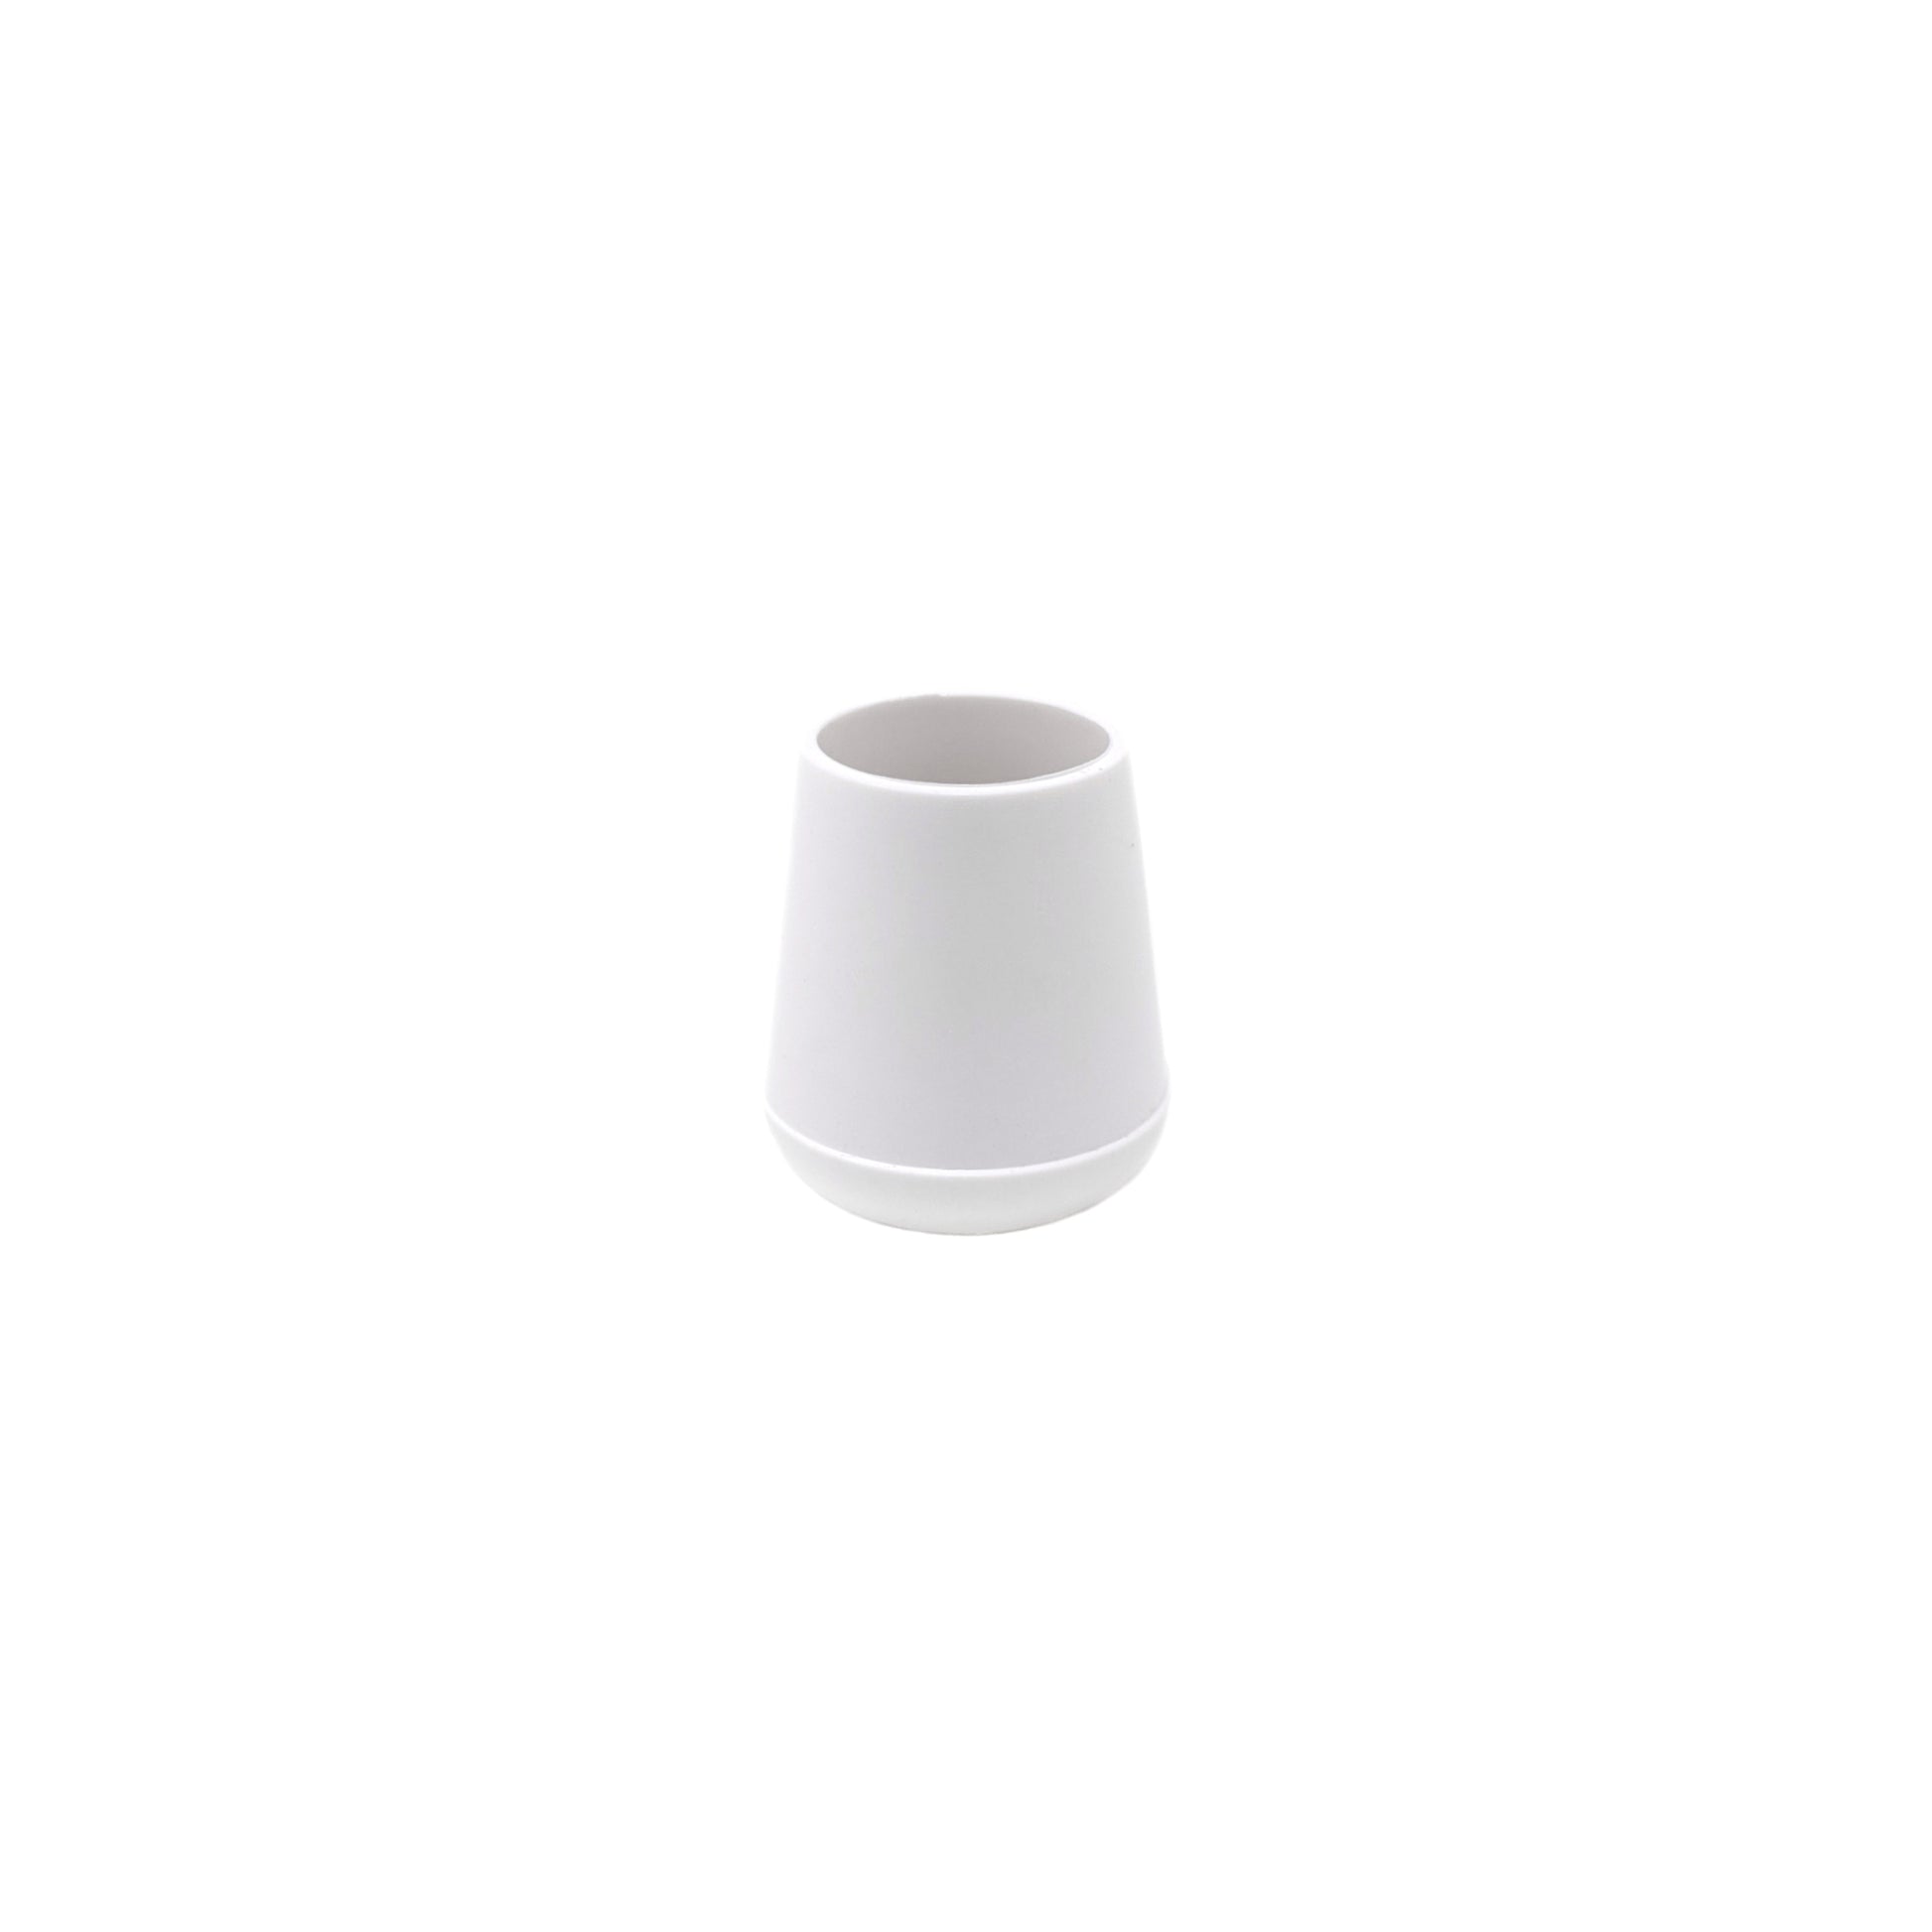 14mm White Rubber Ferrules with Steel Base Insert - Made in Germany - Keay Vital Parts